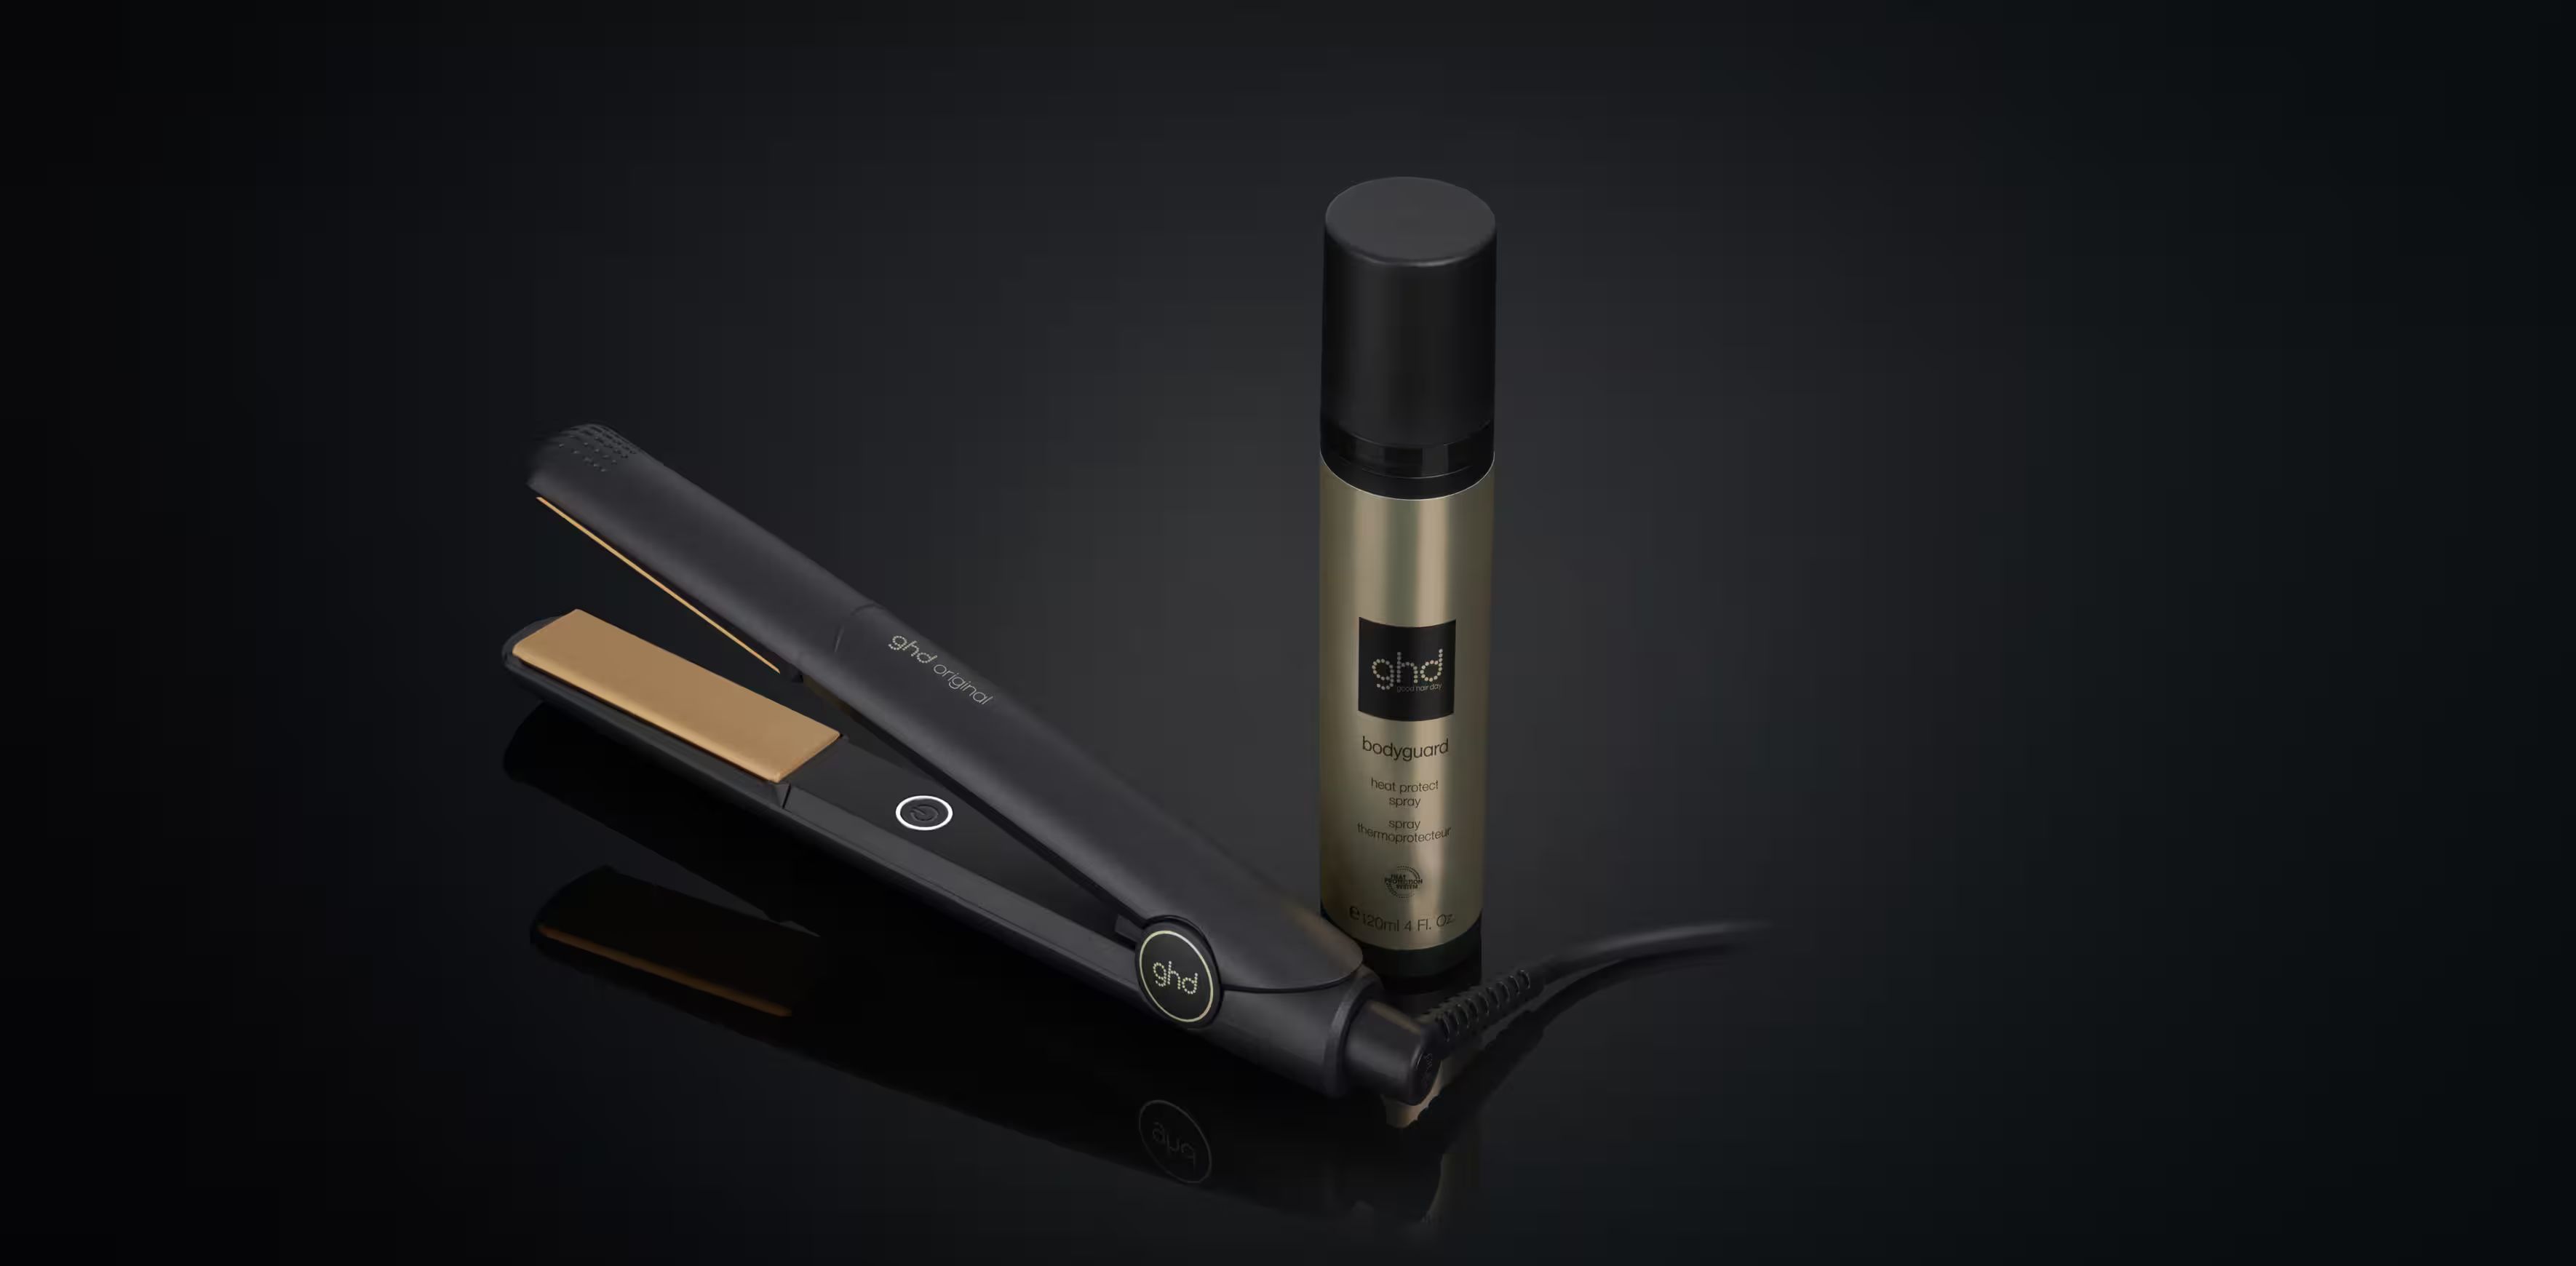 ghd iconic duo | ghd (US)